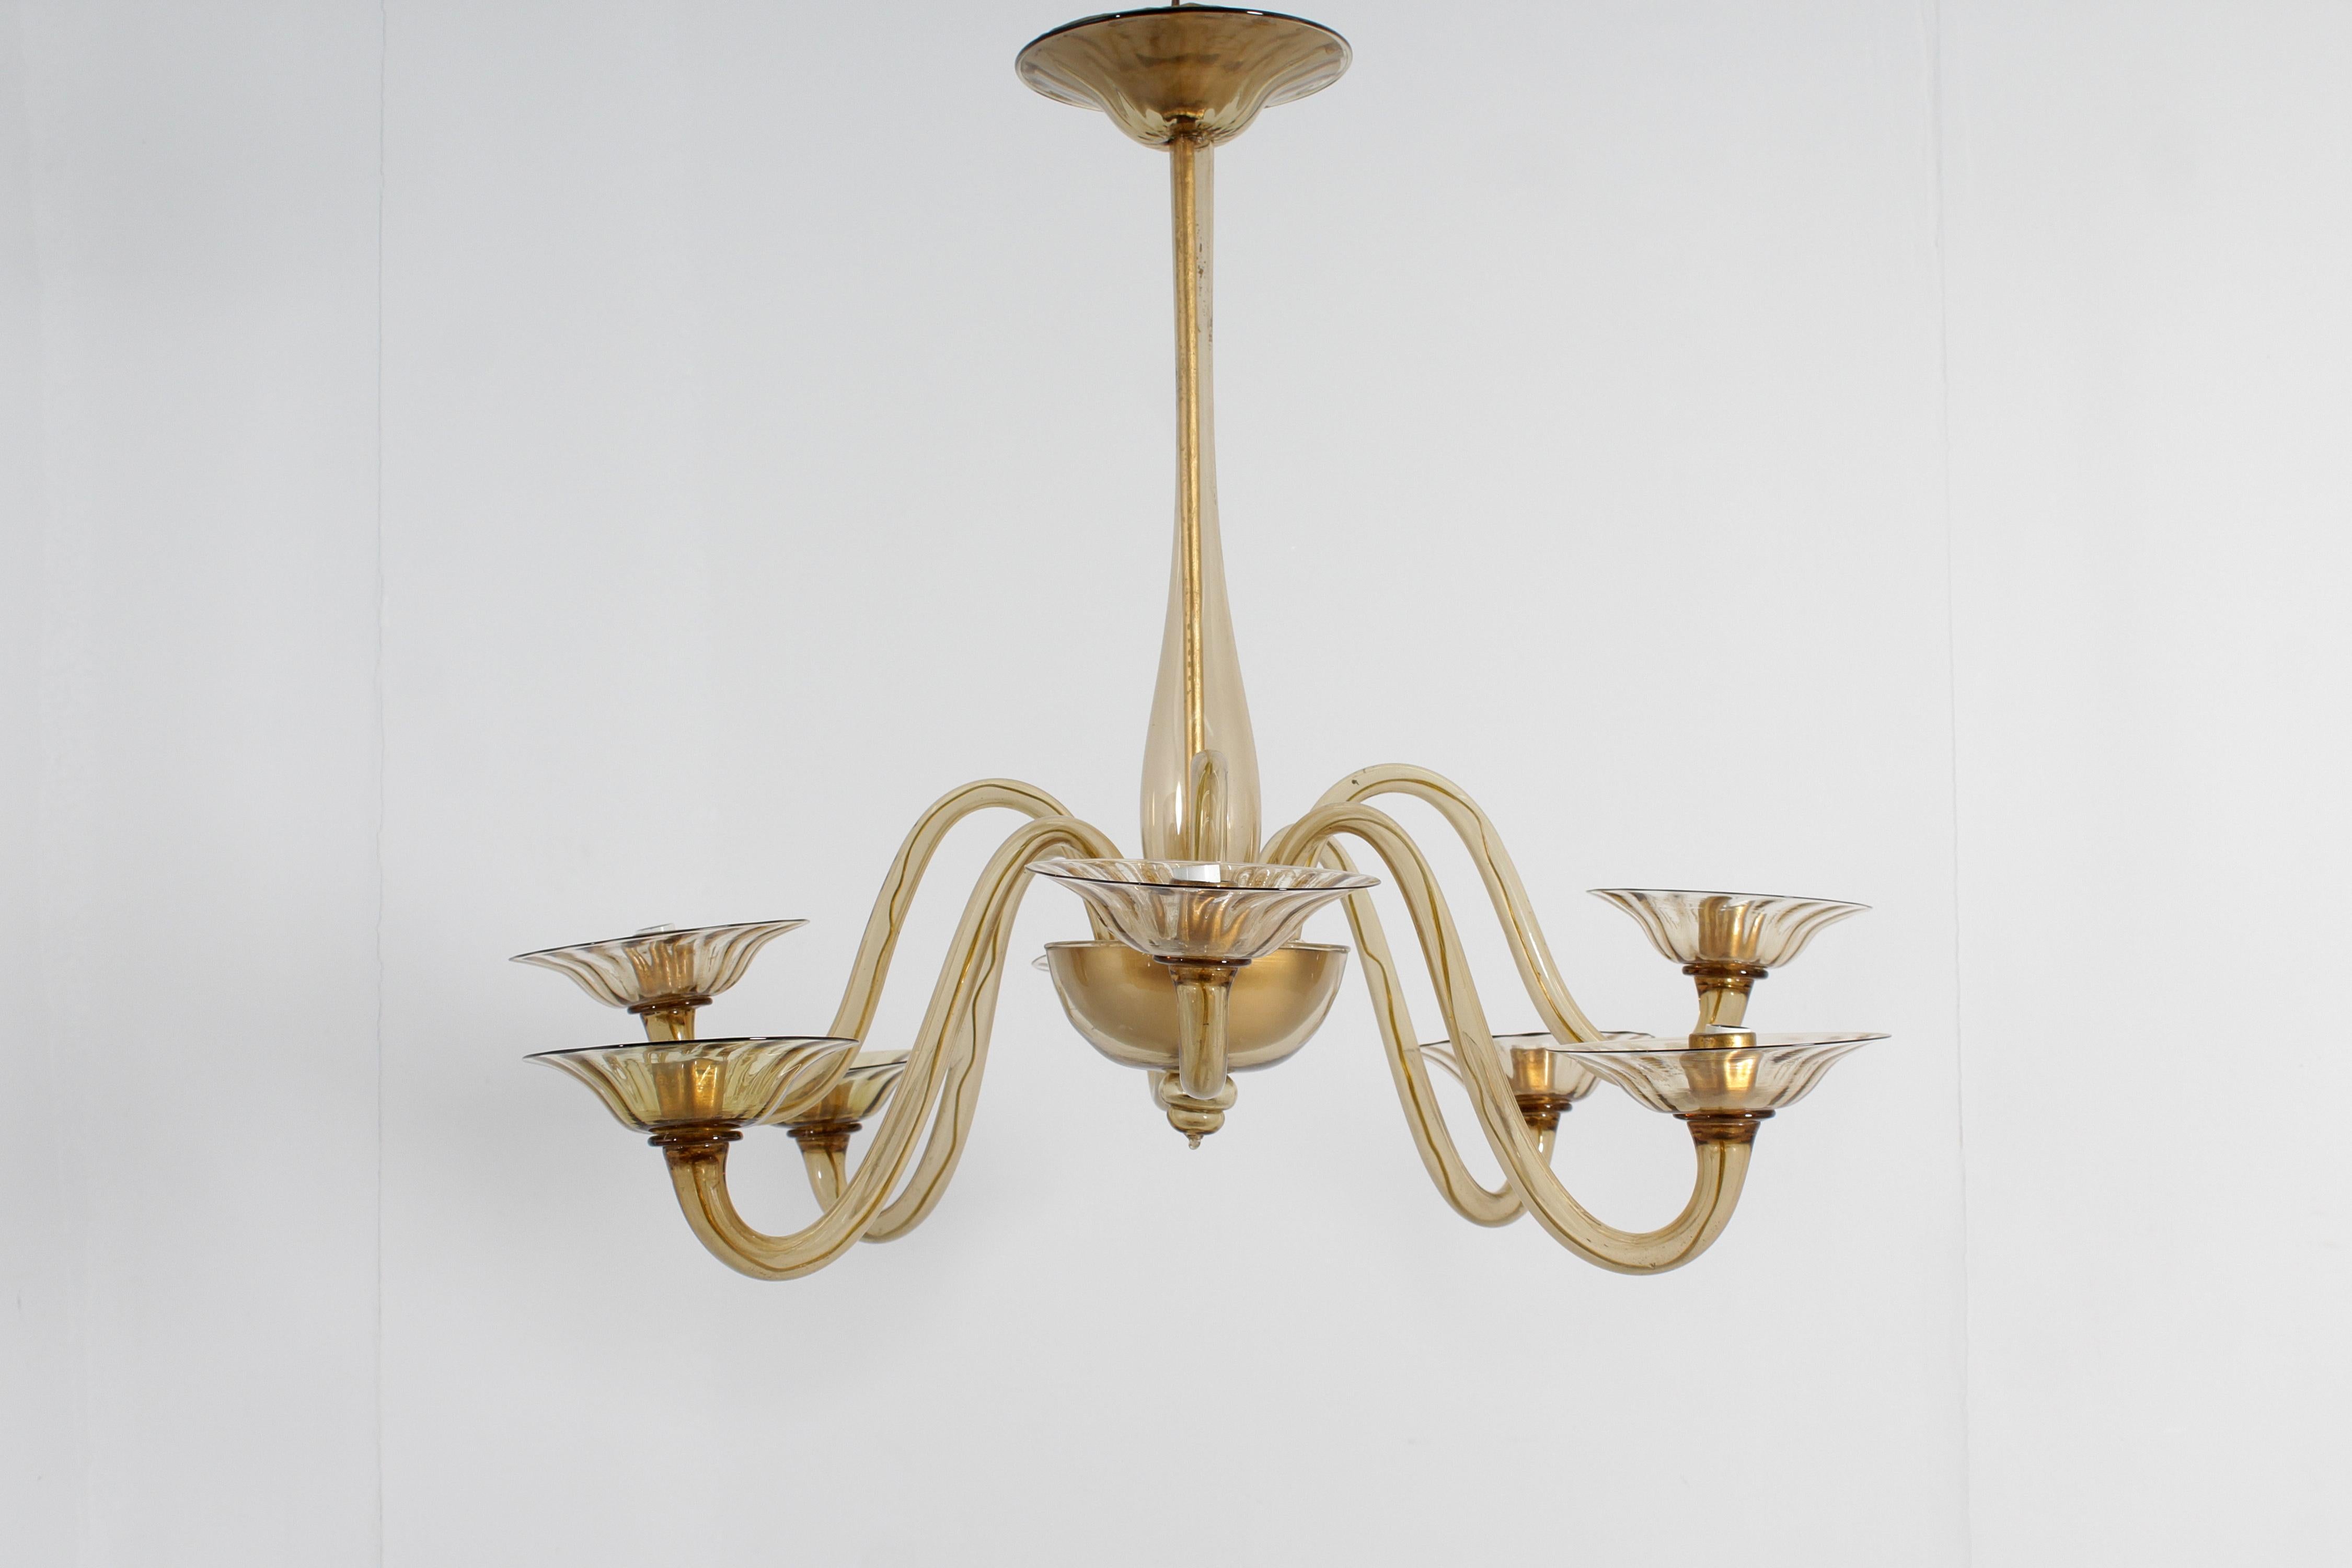 Very beautiful and elegant eight-arm chandelier with a classic venetian design in Murano glass. Entirely in amber hand-blown glass, with eight curved arms and a central body in smooth glass, lamp holder cups and glass rosette with hints of ribs. Rod